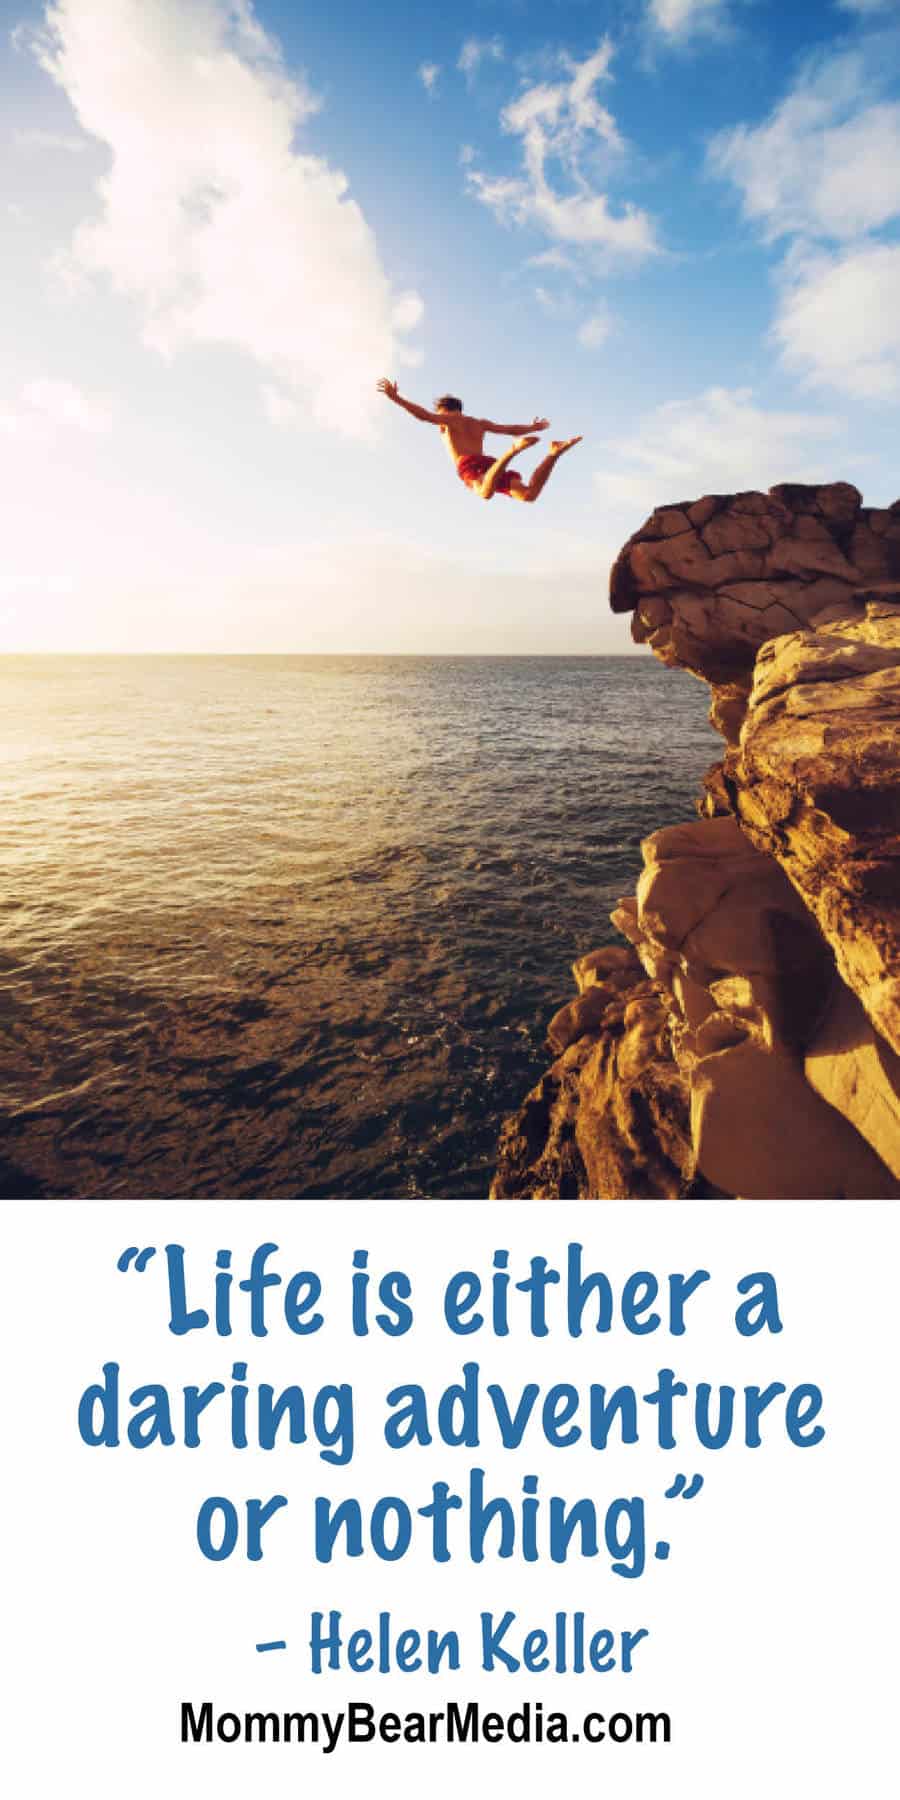 “Life is either a daring adventure or nothing.” – Helen Keller